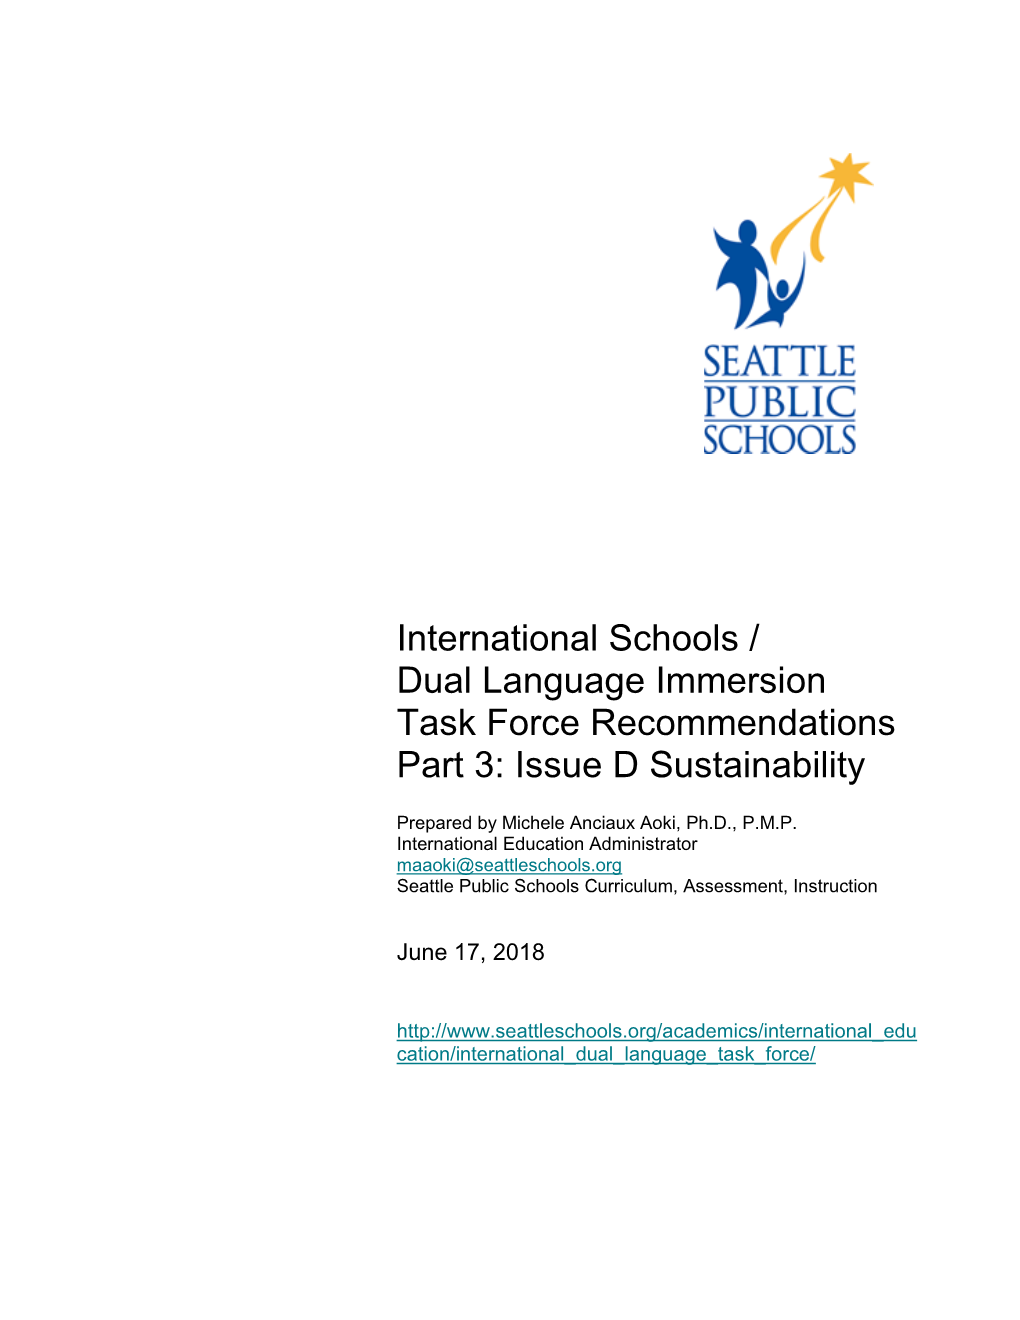 International Schools / Dual Language Immersion Task Force Recommendations Part 3: Issue D Sustainability